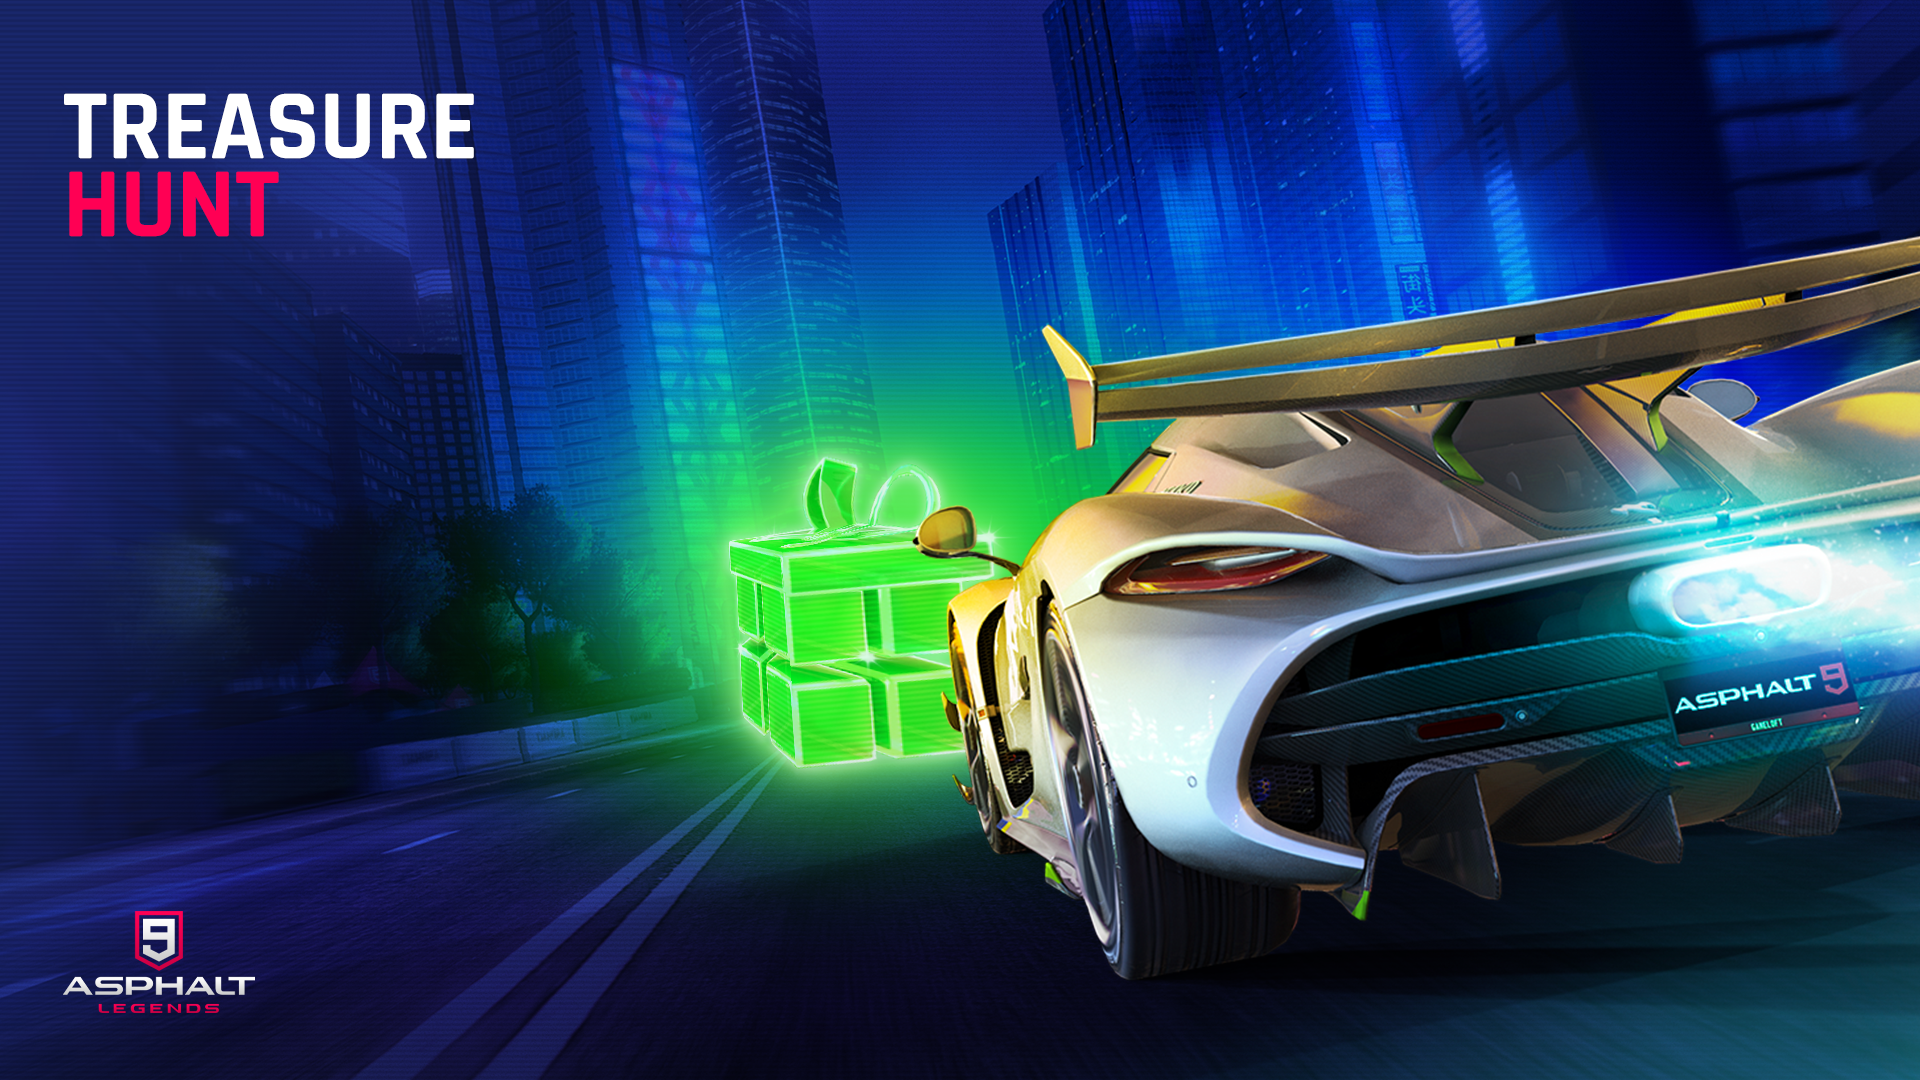 Asphalt 9: Legends - Hey Legends! Big news, we are officially available on  Steam 🤩 ✓ Cross platform. ✓ Cross-save Xbox, Windows, Steam Hit the gas  and join the fun, download the game now!